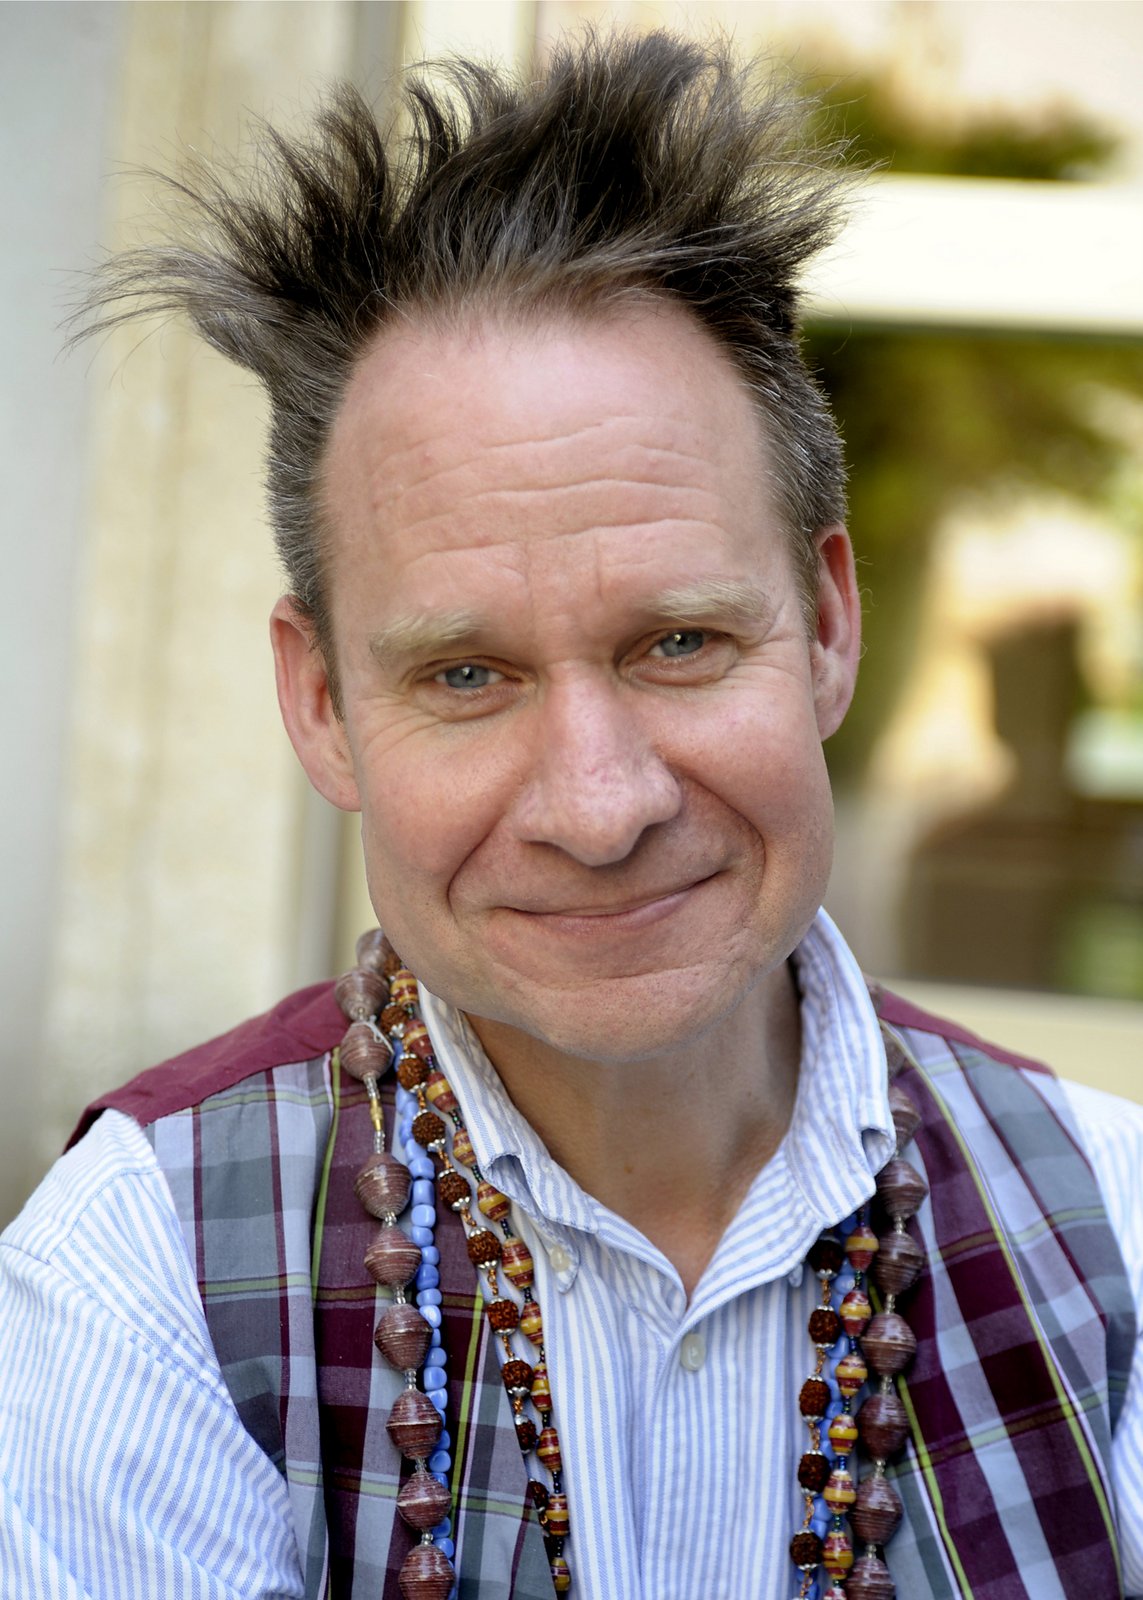 Peter Sellars, director of the Los Angeles Master Chorale’s production of Lagrime; PHOTO CREDIT: Ruth Walz